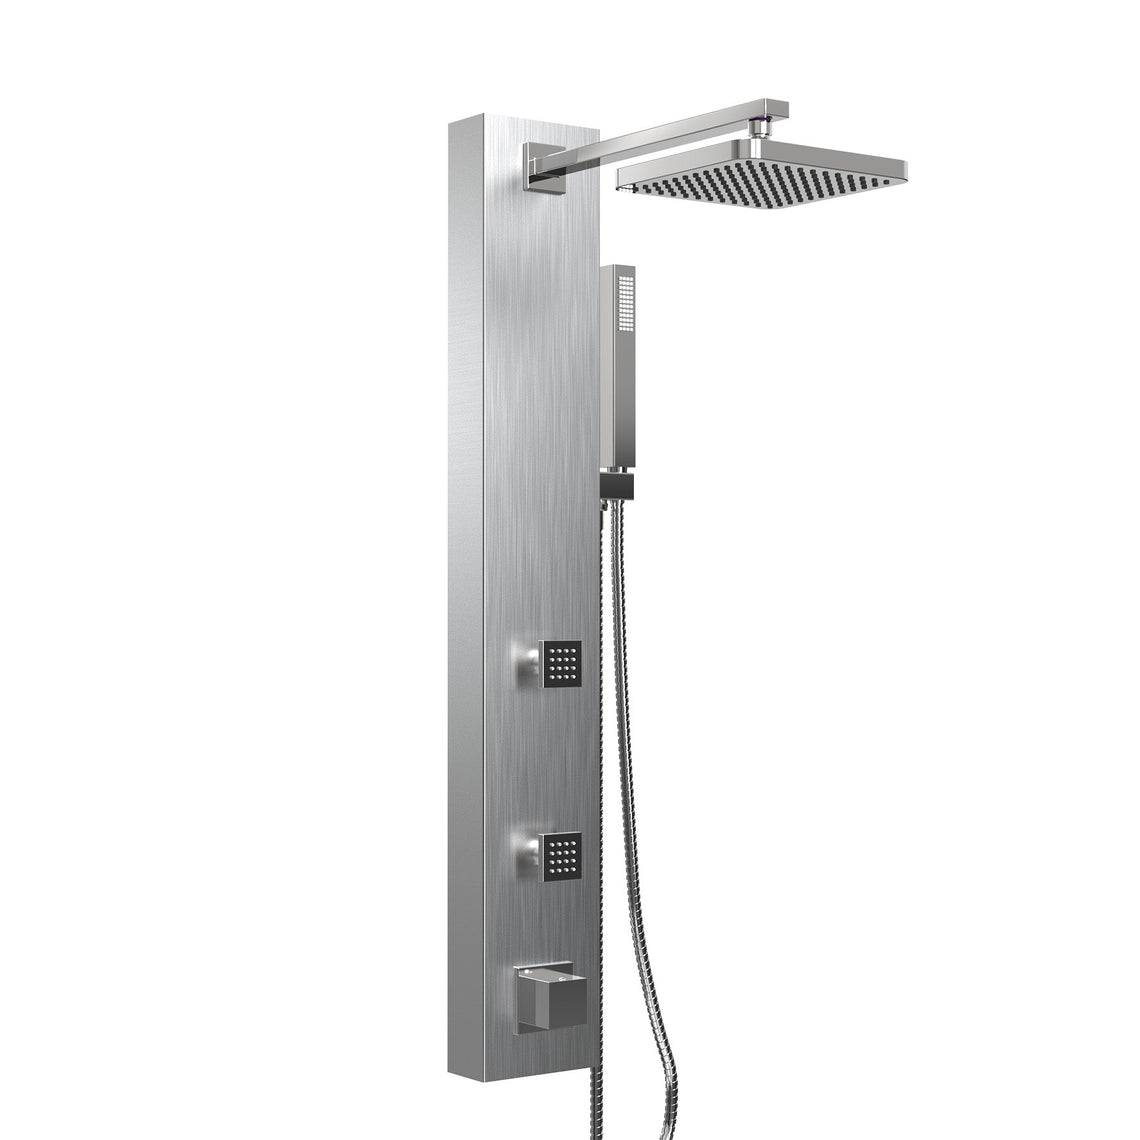 39 in. 2-Jet Stainless Steel Multi-Function Shower Panel System with Adjustable Rainfall Headshower & Handshower, Self-Cleaning & Jet Massage Feature